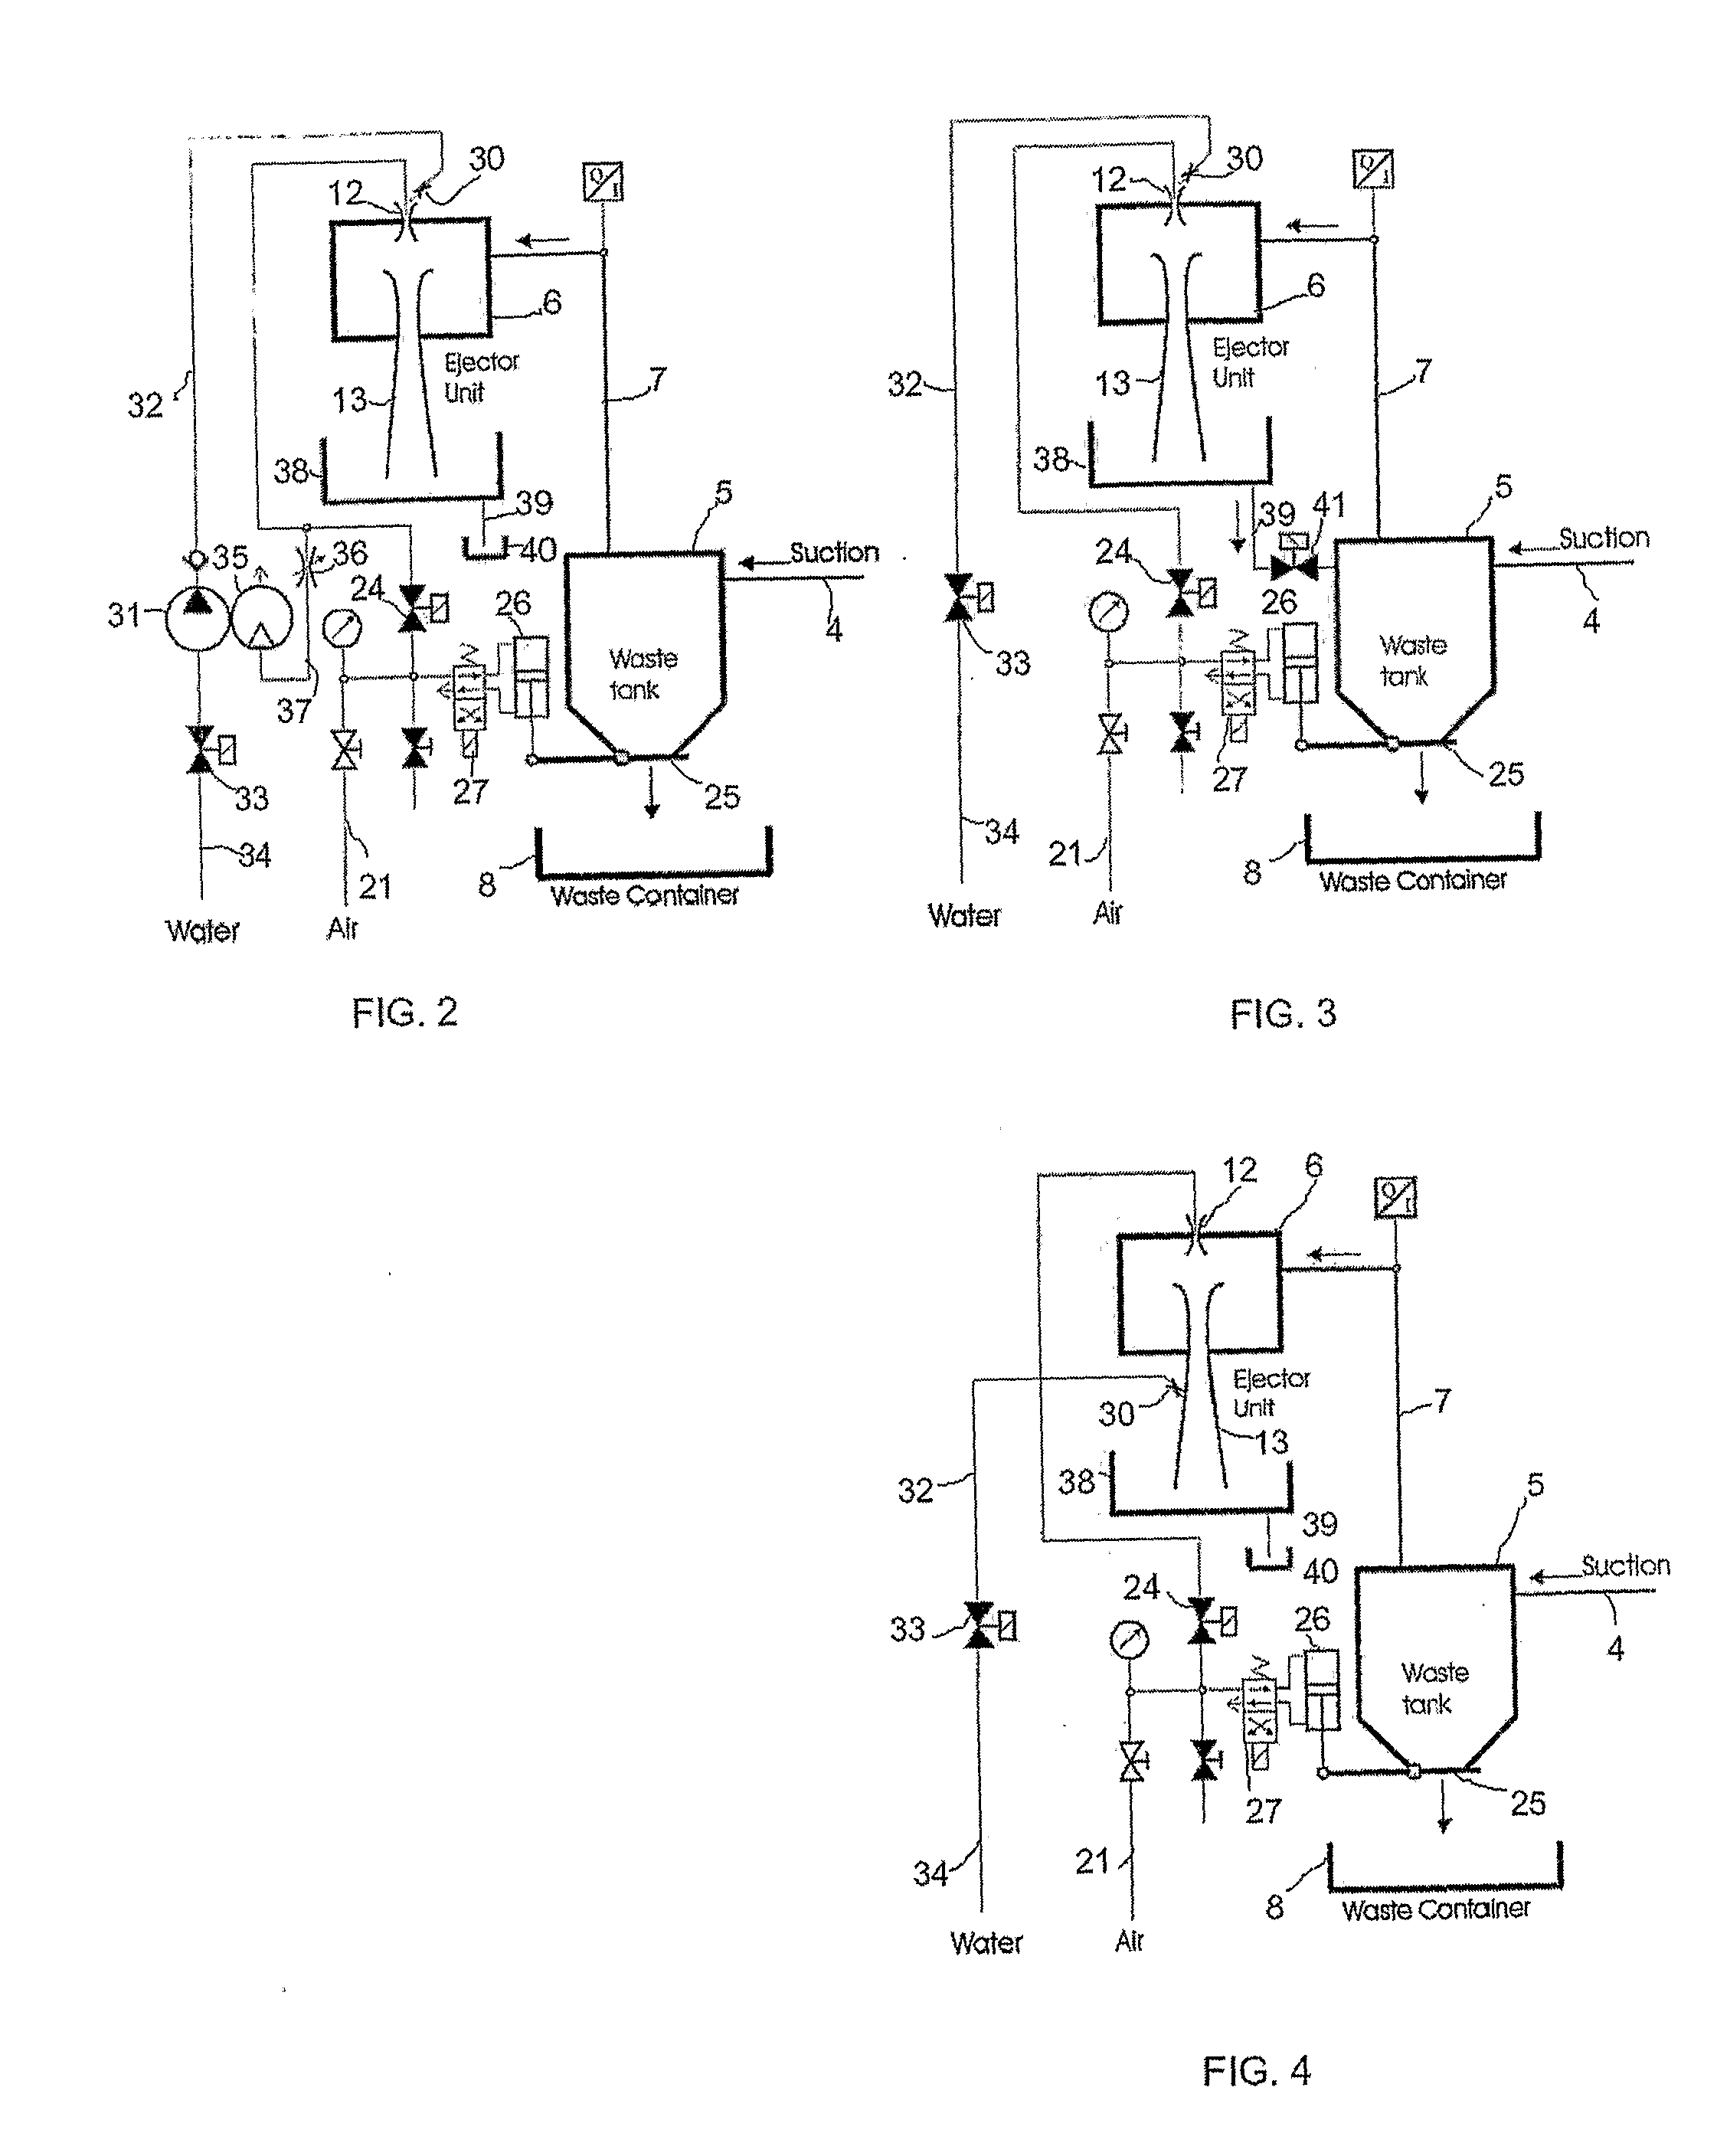 Method and apparatus for conveying material